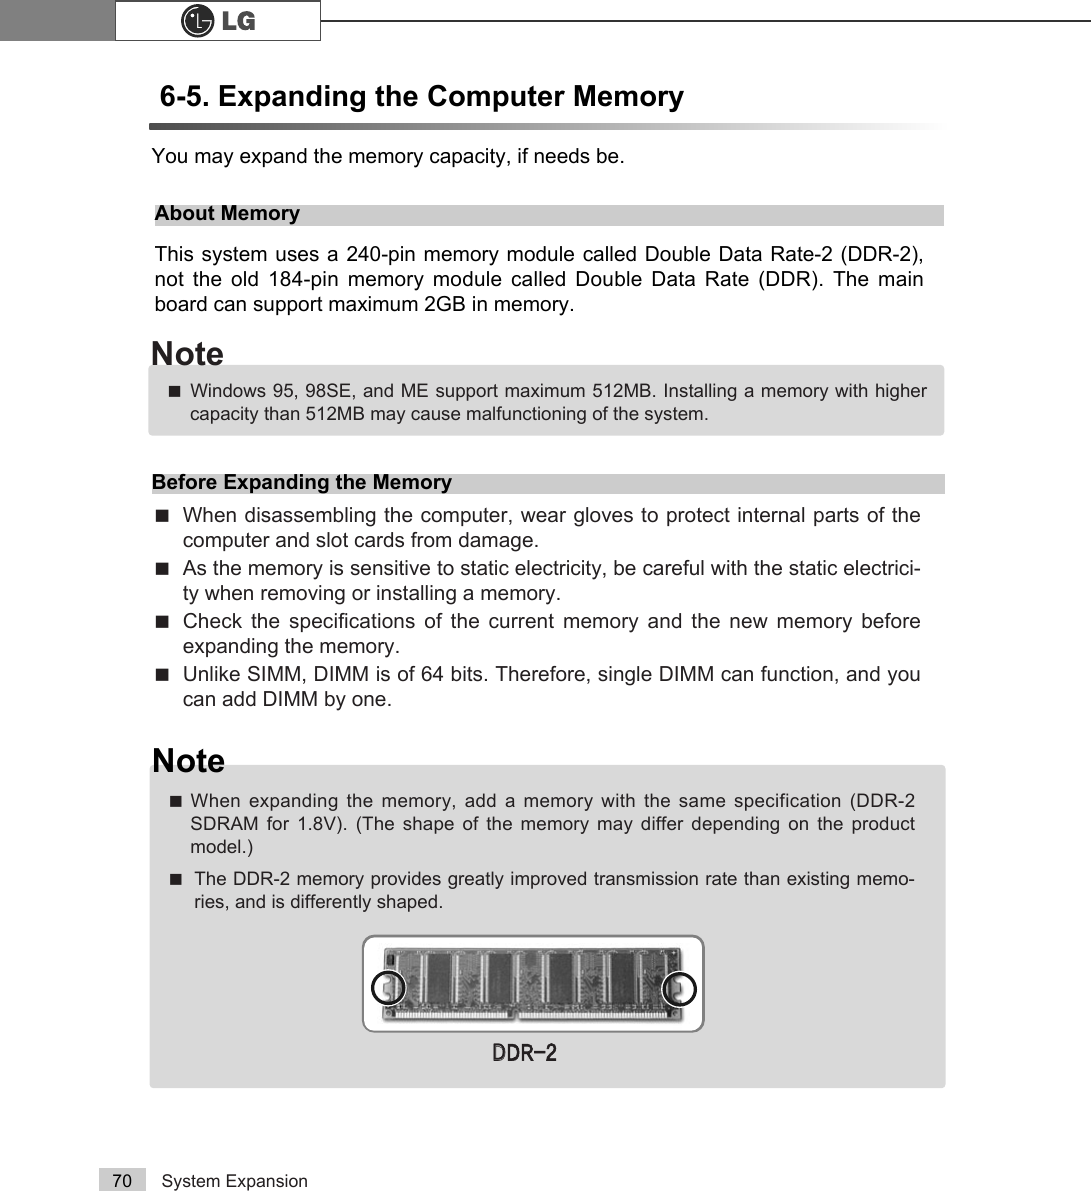 System Expansion706-5. Expanding the Computer Memory You may expand the memory capacity, if needs be.About MemoryThis system uses a 240-pin memory module called Double Data Rate-2 (DDR-2),not the old 184-pin memory module called Double Data Rate (DDR). The mainboard can support maximum 2GB in memory.Before Expanding the MemoryãWhen disassembling the computer, wear gloves to protect internal parts of thecomputer and slot cards from damage.ãAs the memory is sensitive to static electricity, be careful with the static electrici-ty when removing or installing a memory.ãCheck the specifications of the current memory and the new memory beforeexpanding the memory.ãUnlike SIMM, DIMM is of 64 bits. Therefore, single DIMM can function, and youcan add DIMM by one.ãWindows 95, 98SE, and ME support maximum 512MB. Installing a memory with highercapacity than 512MB may cause malfunctioning of the system.NoteNoteãWhen expanding the memory, add a memory with the same specification (DDR-2SDRAM for 1.8V). (The shape of the memory may differ depending on the productmodel.)ãThe DDR-2 memory provides greatly improved transmission rate than existing memo-ries, and is differently shaped.&apos;&apos;&apos;5